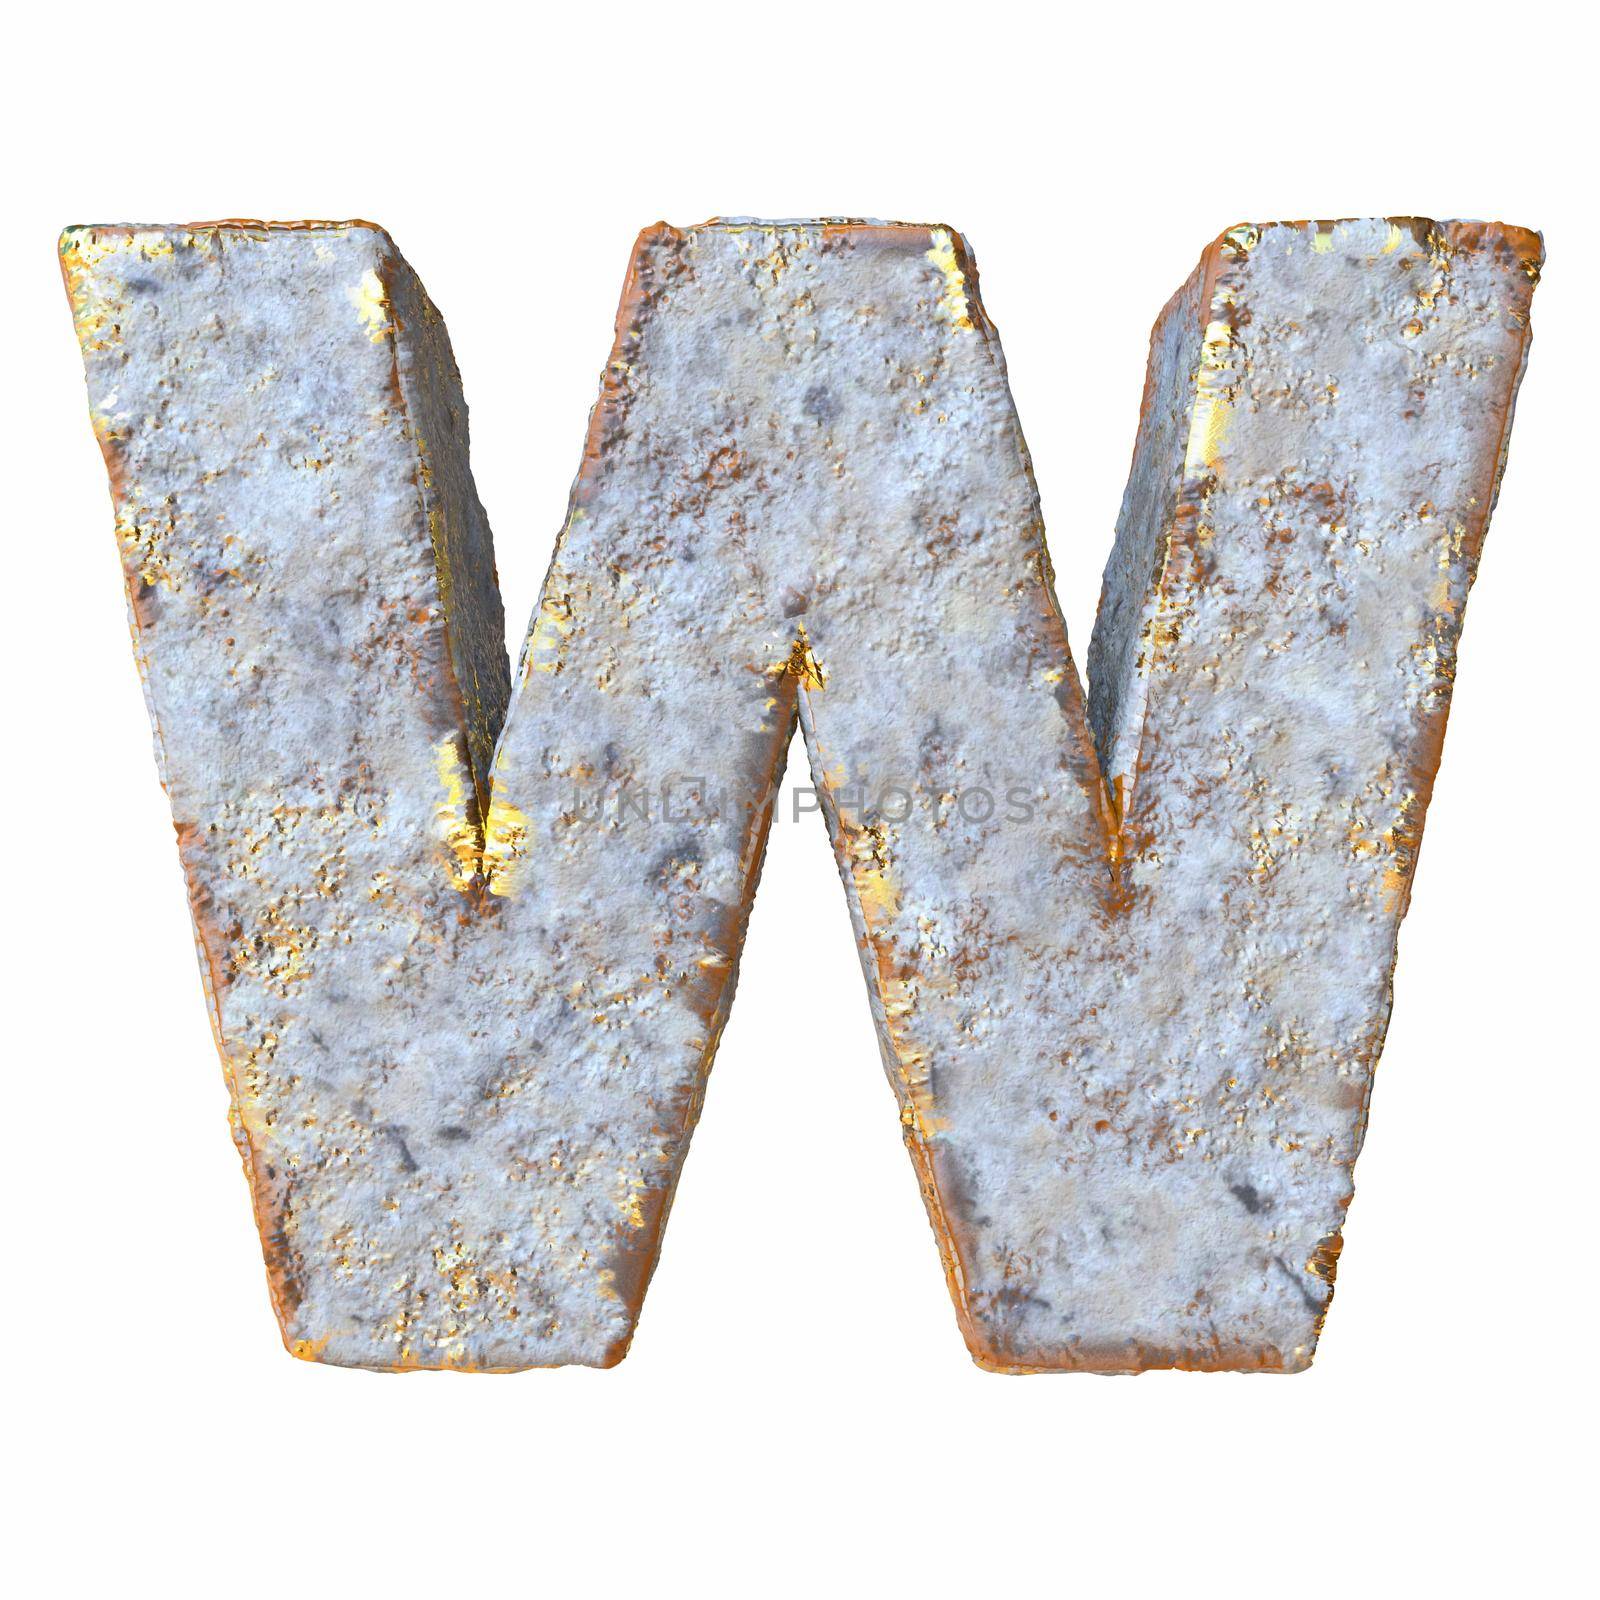 Stone with golden metal particles Letter W 3D by djmilic